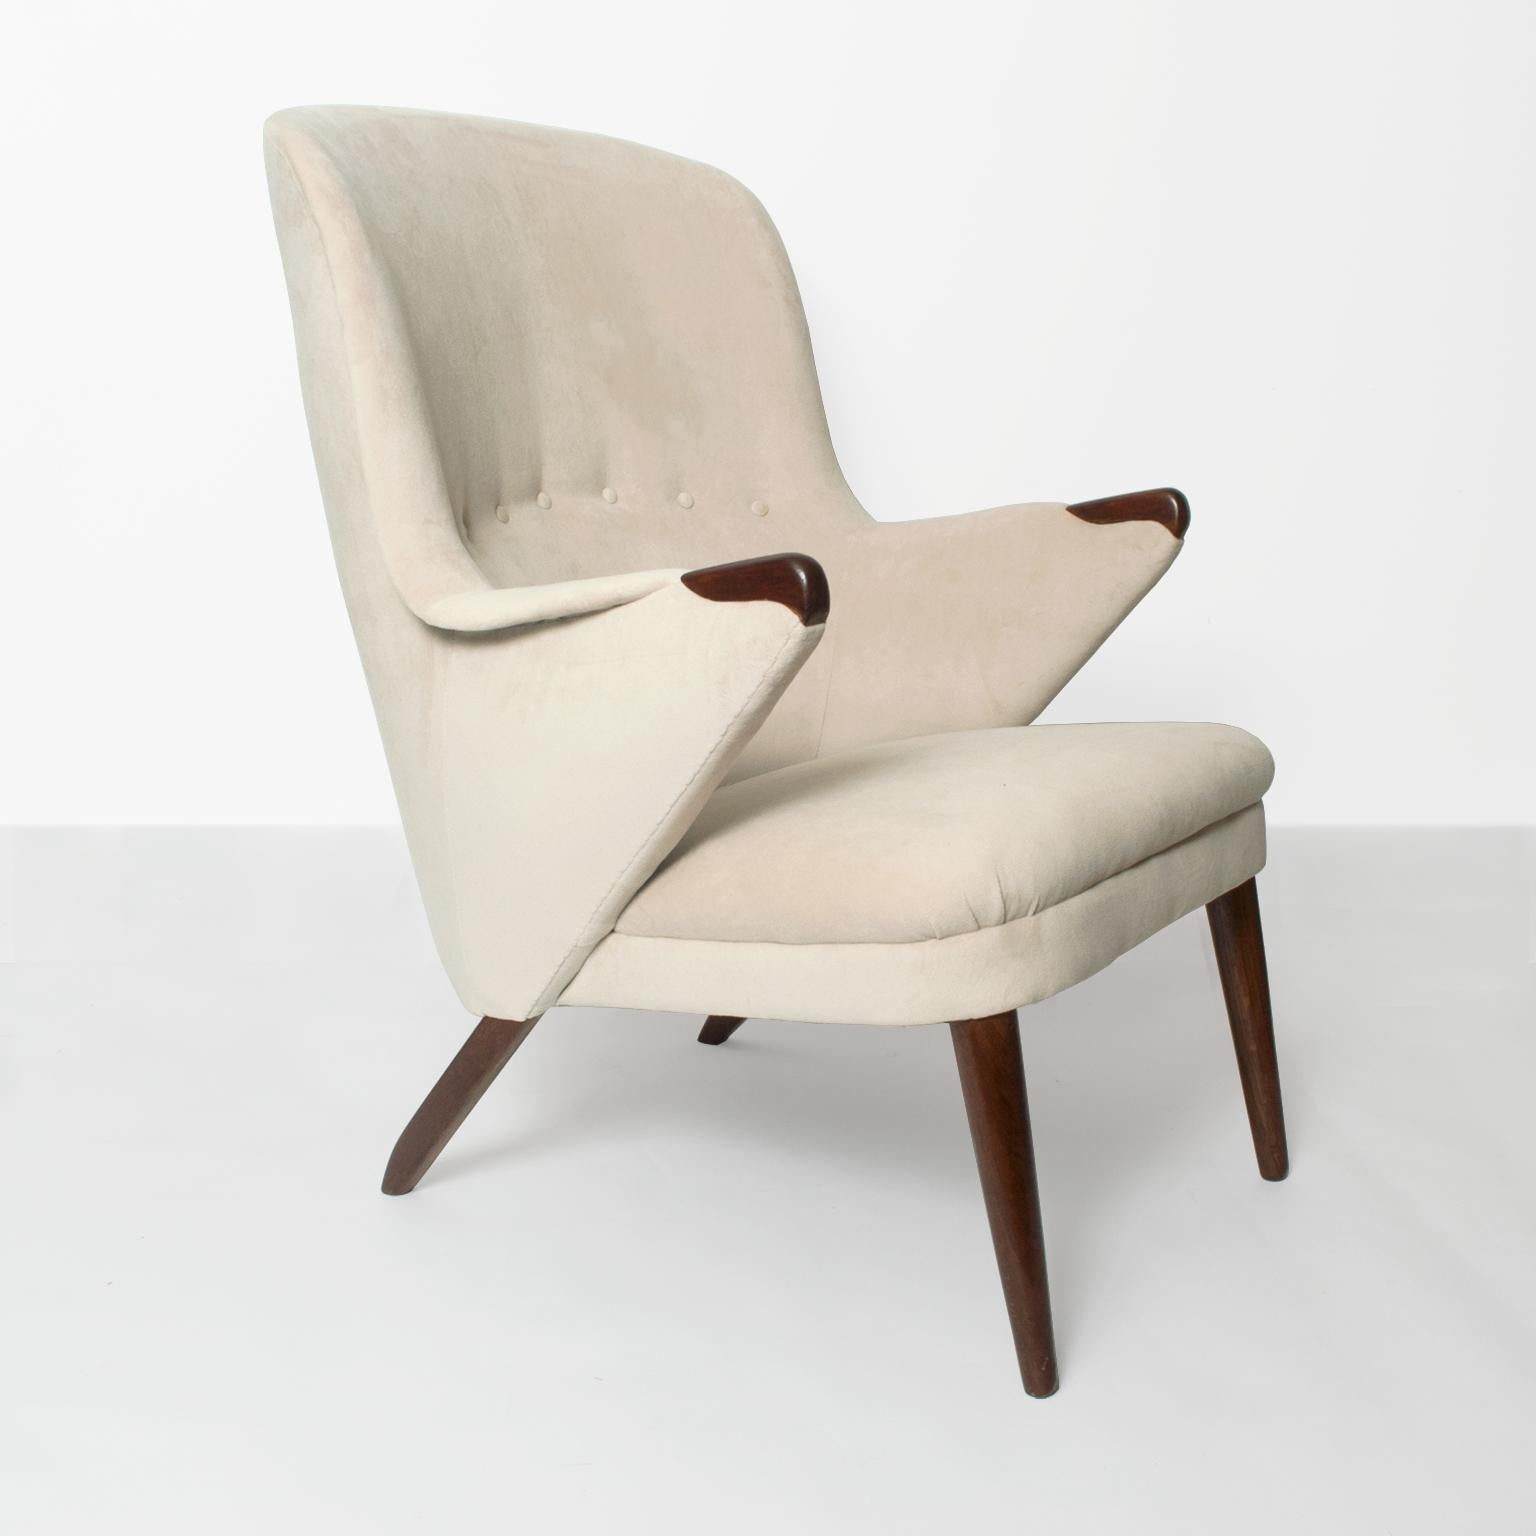 An elegant Scandinavian Modern lounge chair with curved backrest detailed with covered buttons. Legs and hand rest are carved stained solid teak. Newly restored and re-upholstered in cream colored velvet fabric. 
Measures: Height: 37